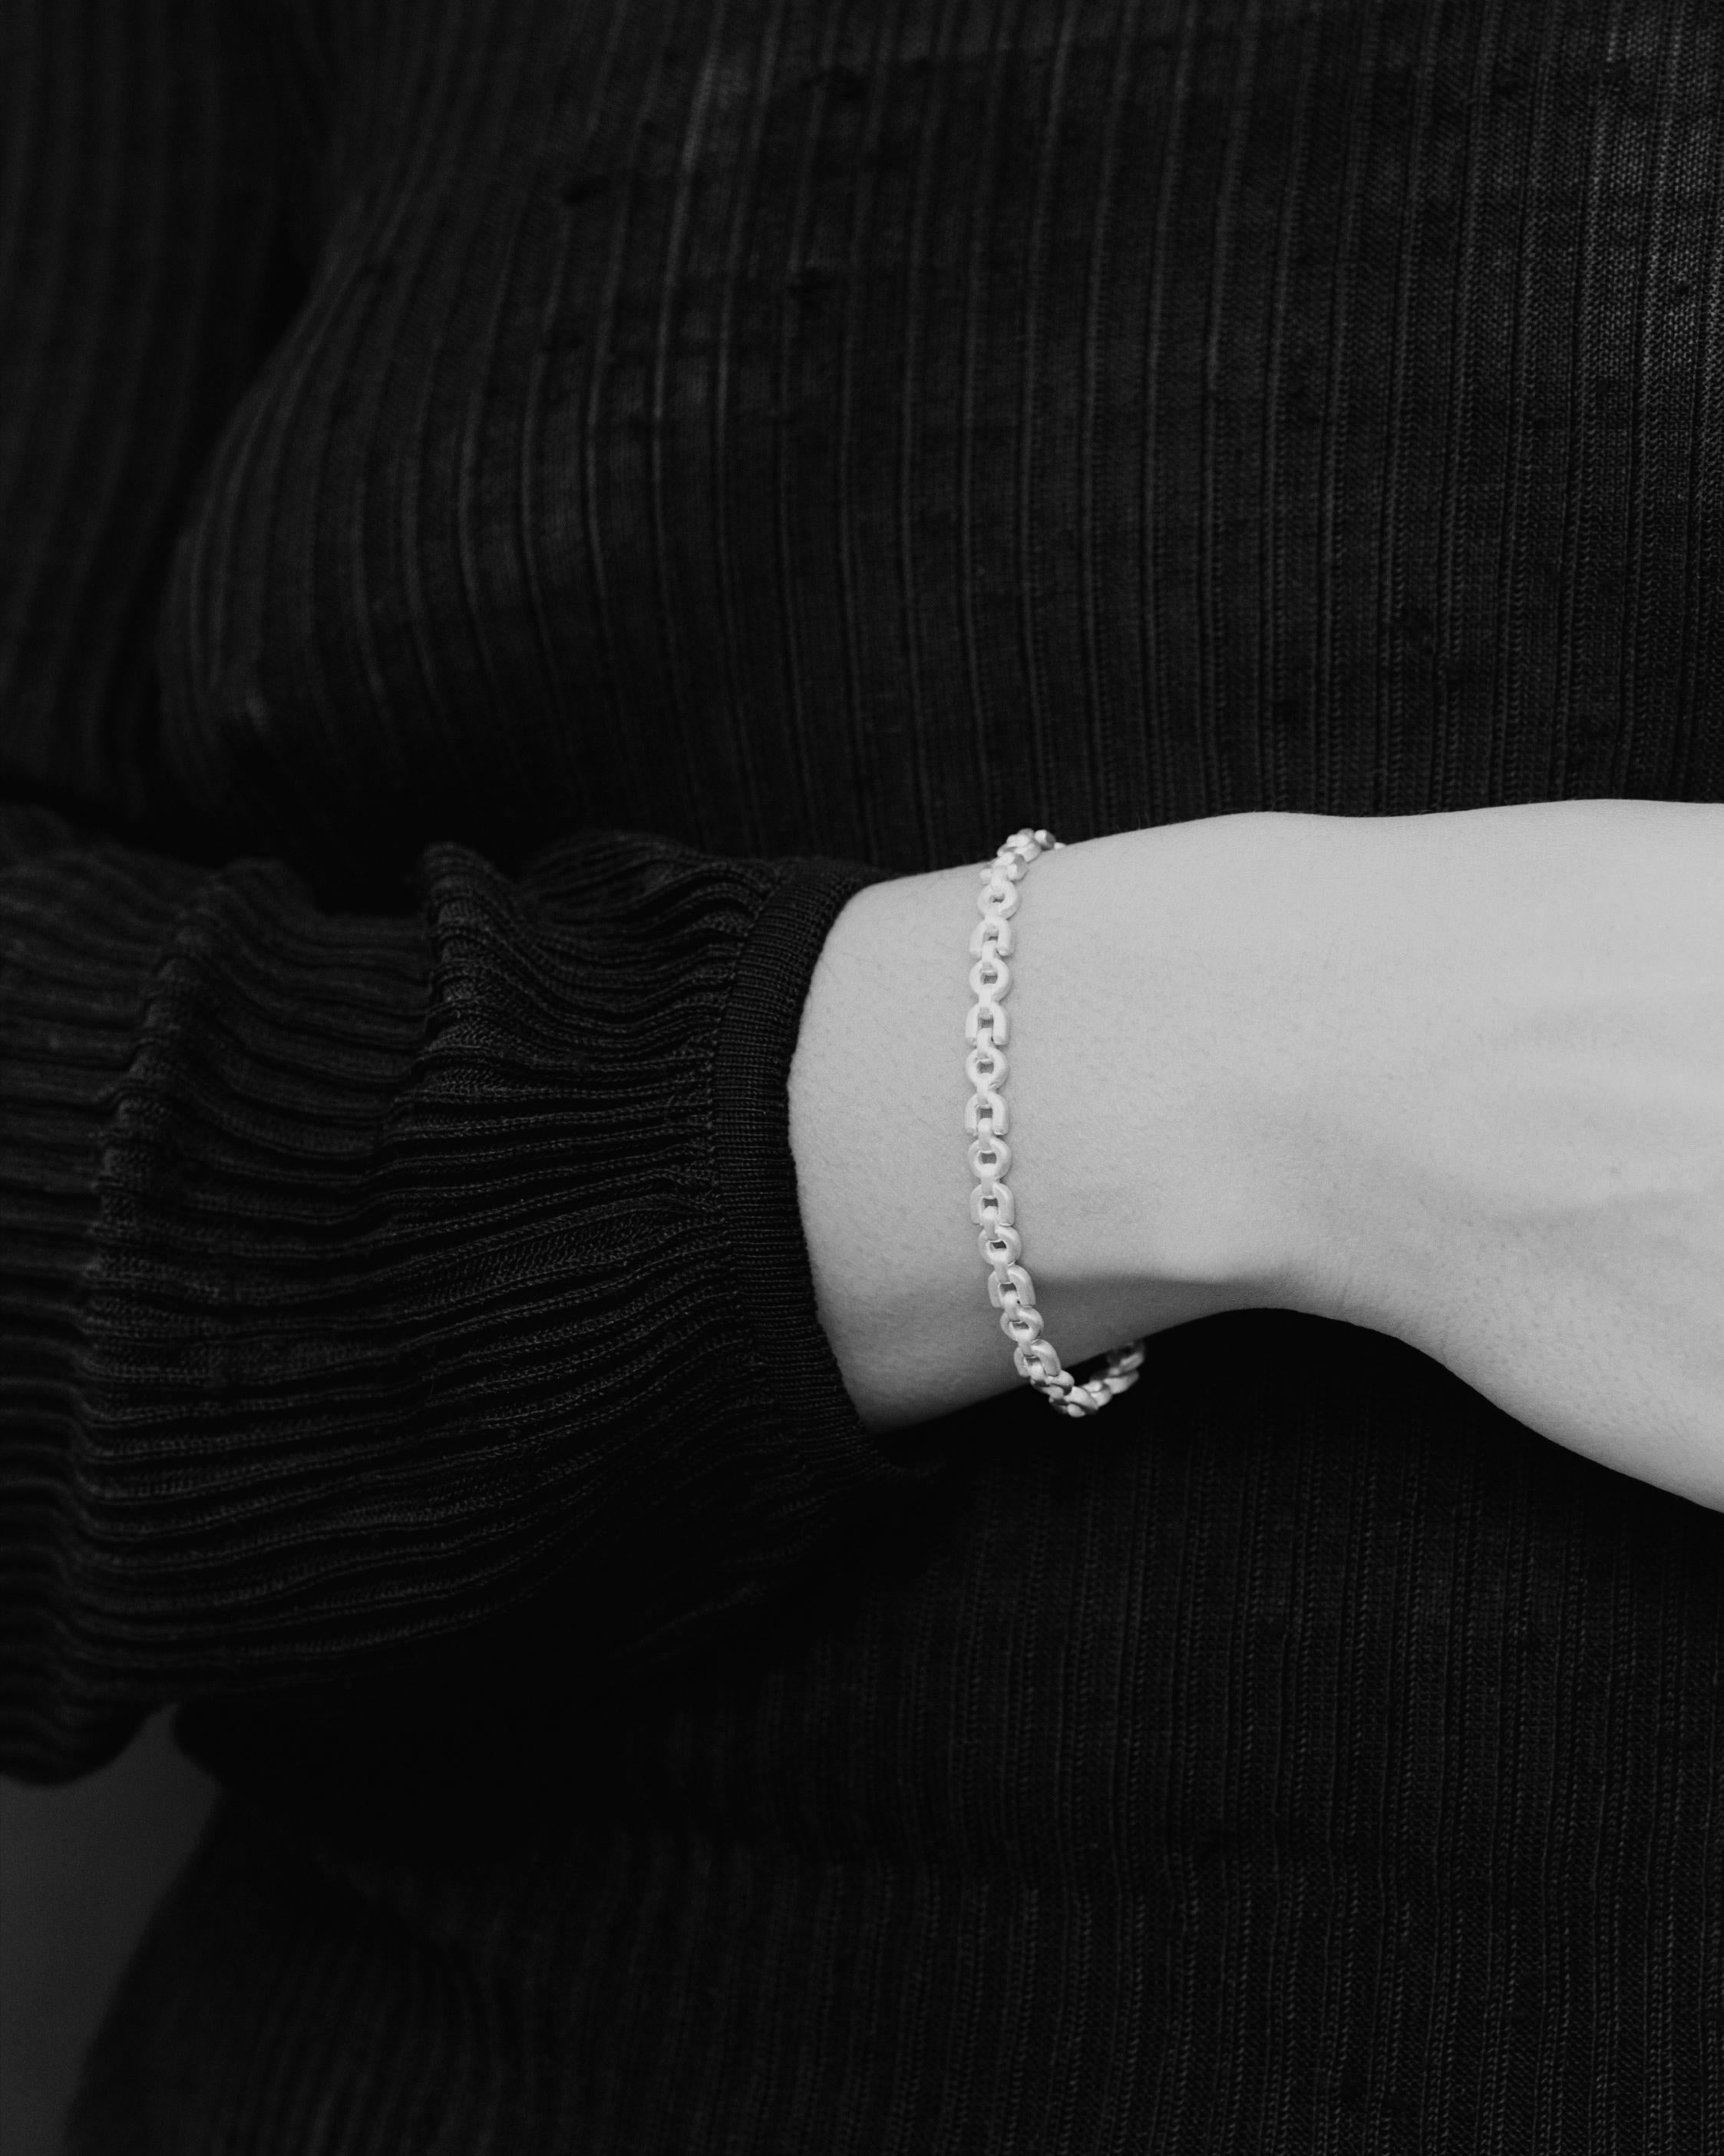 Referencing the durability and beauty of equine accoutrement, this is Tiana Marie Combes' signature equestrian-inspired chain bracelet made in Los Angeles from recycled 14 karat white gold. 

The Equestrian Chain Bracelet wears with an elegantly